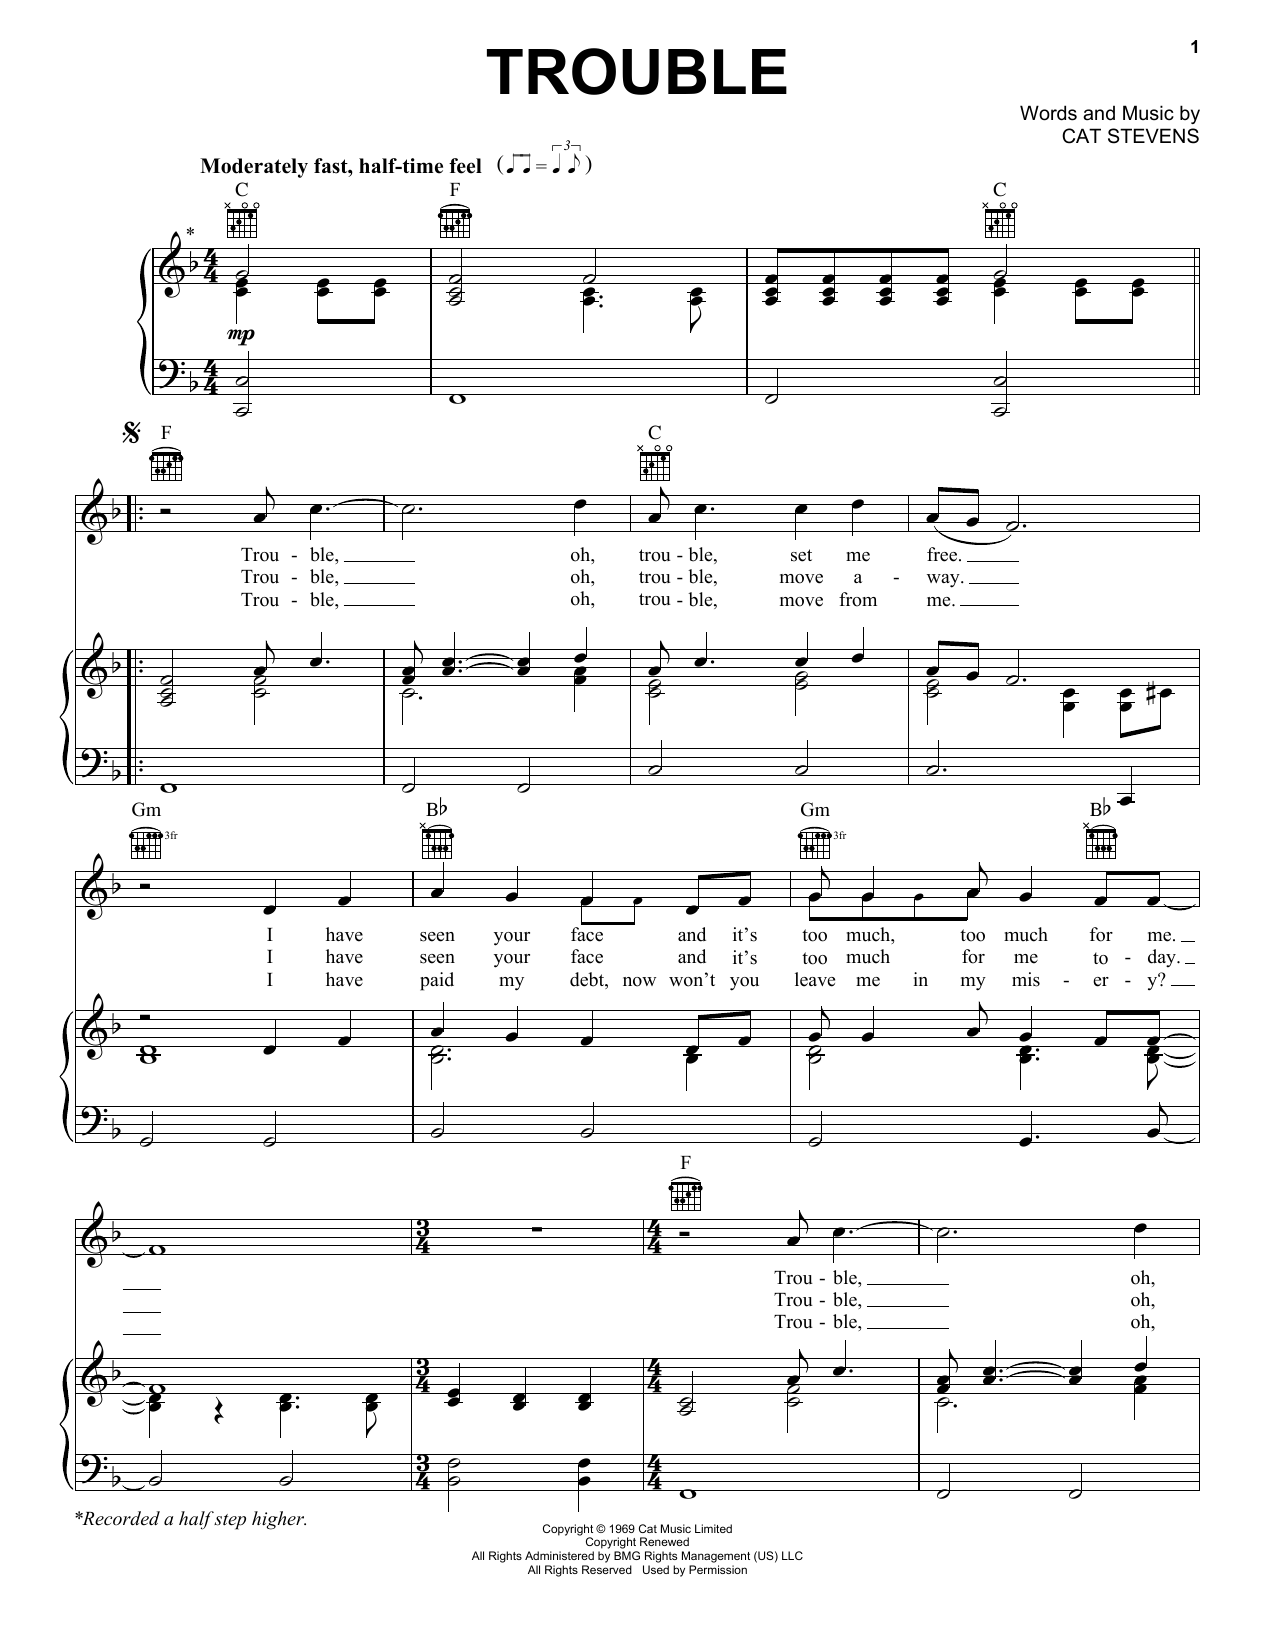 Trouble by C. Stevens - sheet music on MusicaNeo